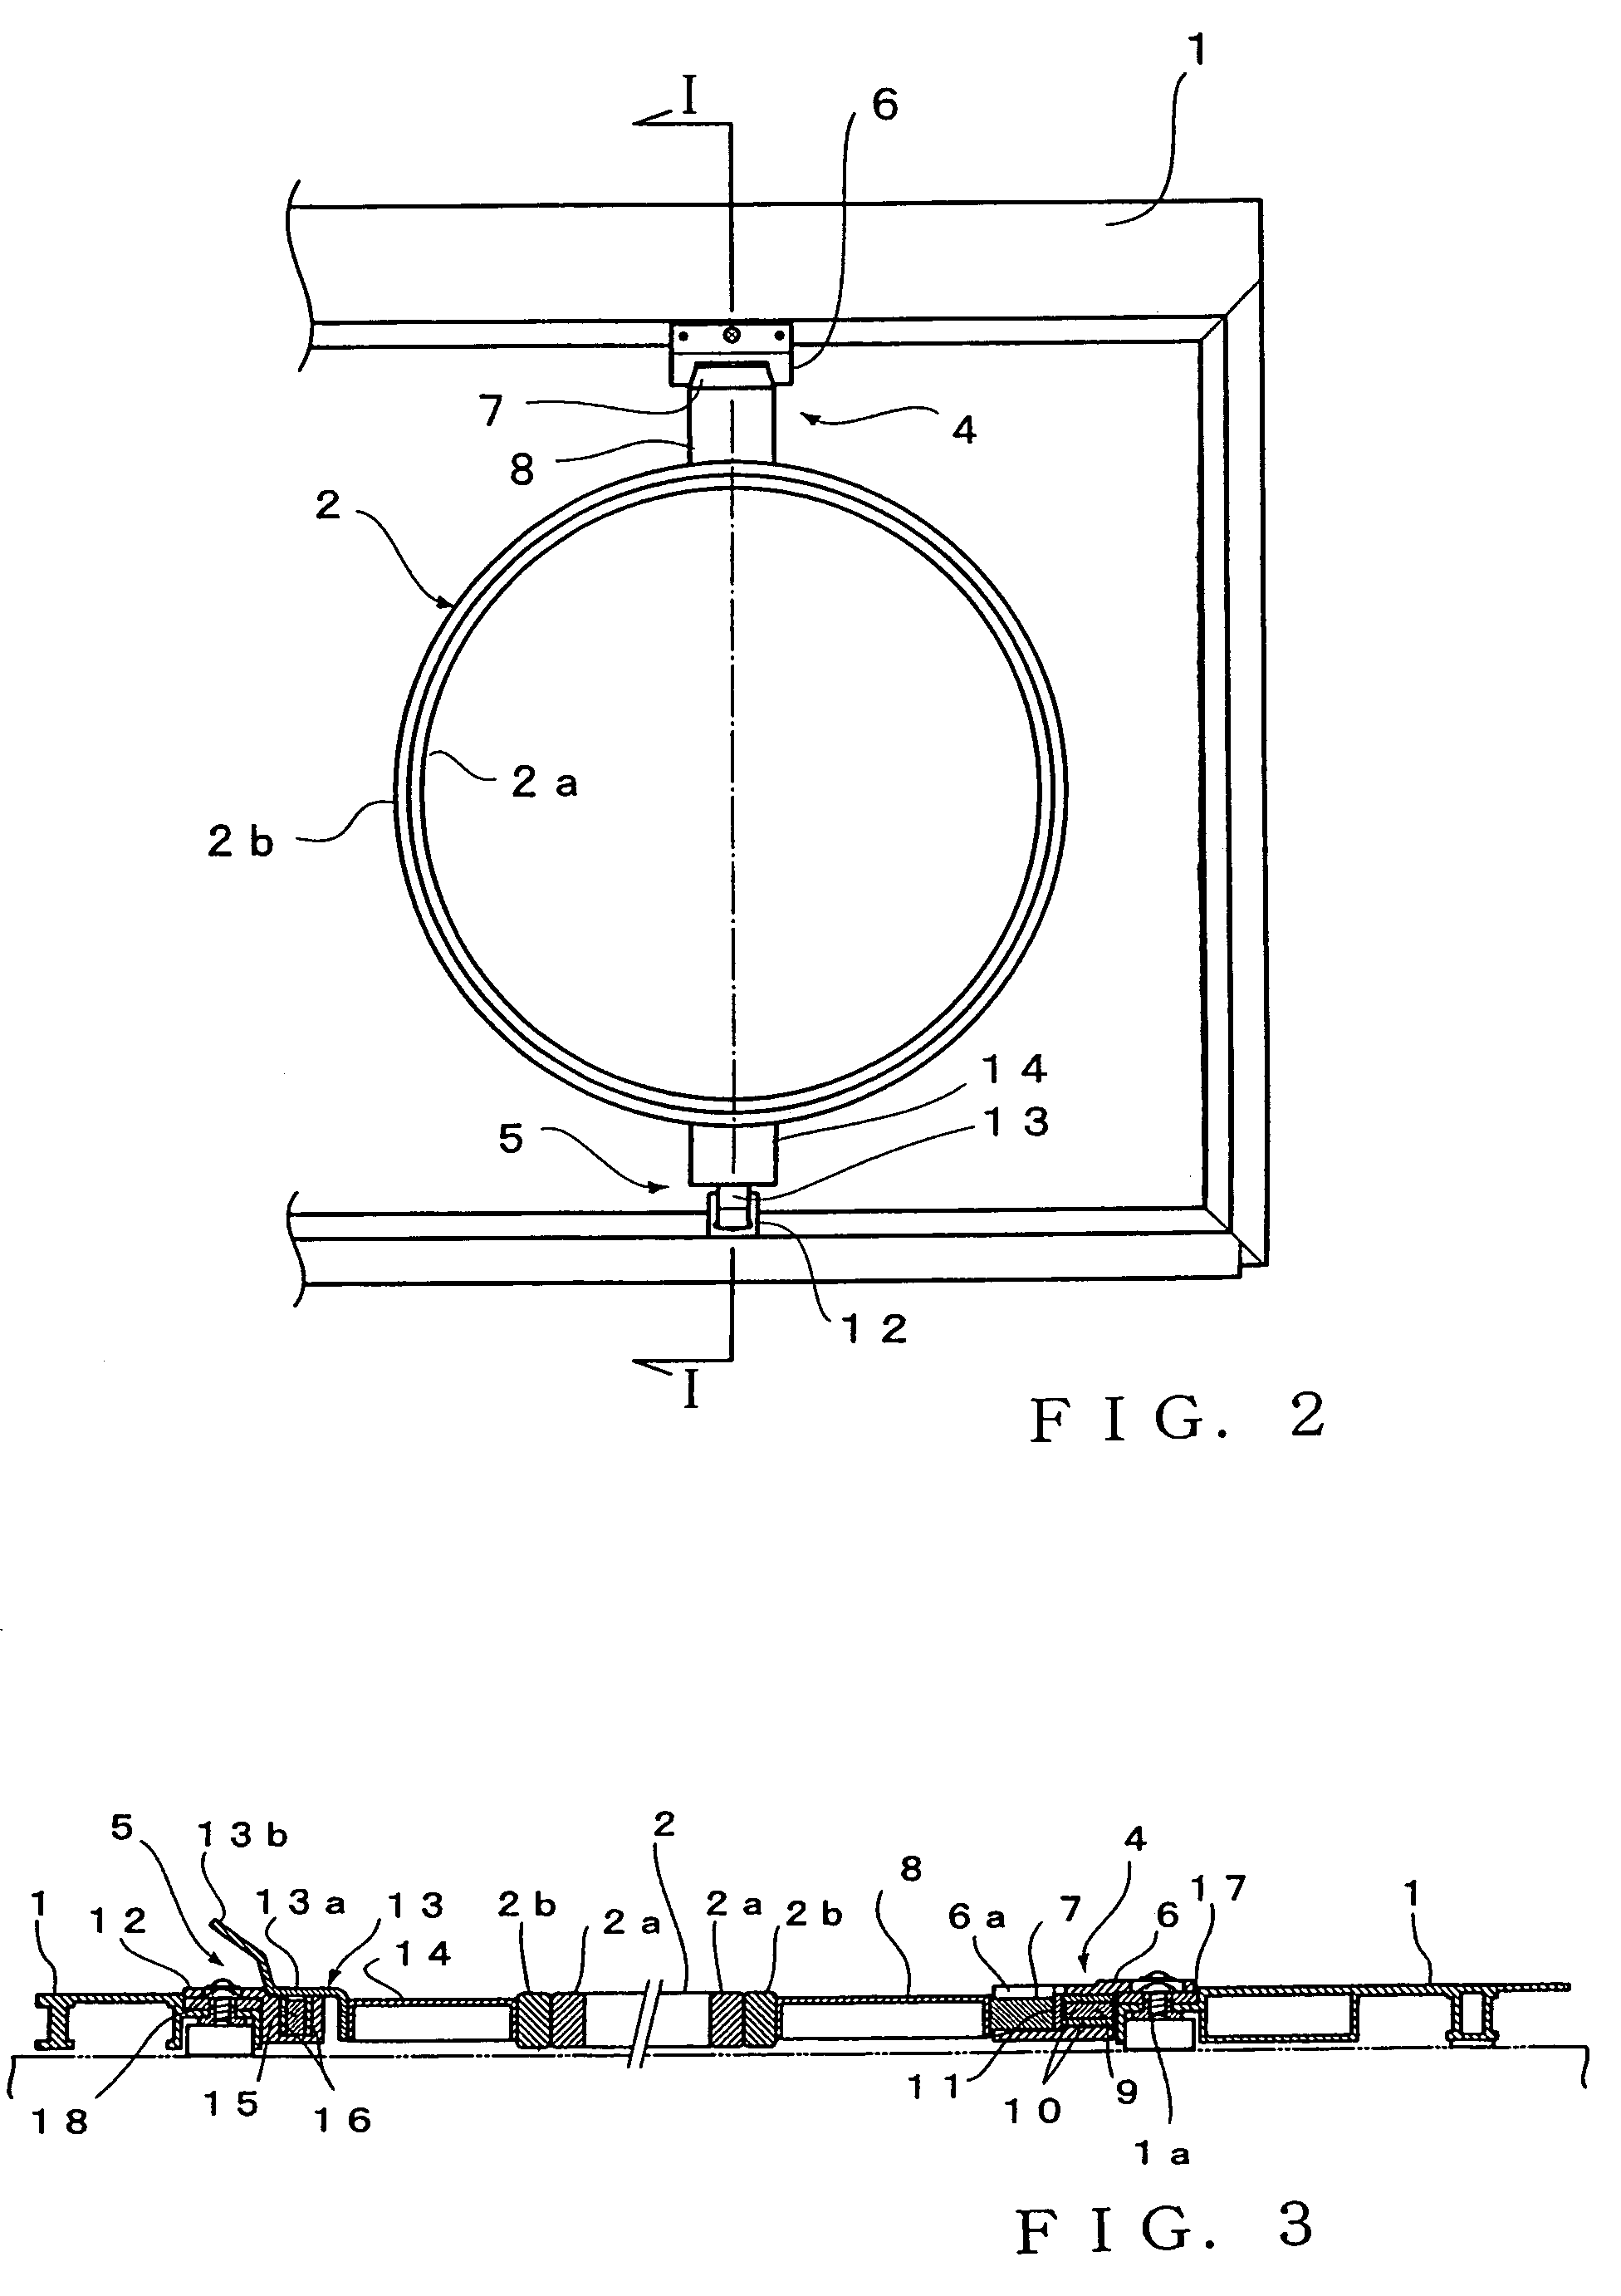 Embroidery-frame mounting structure